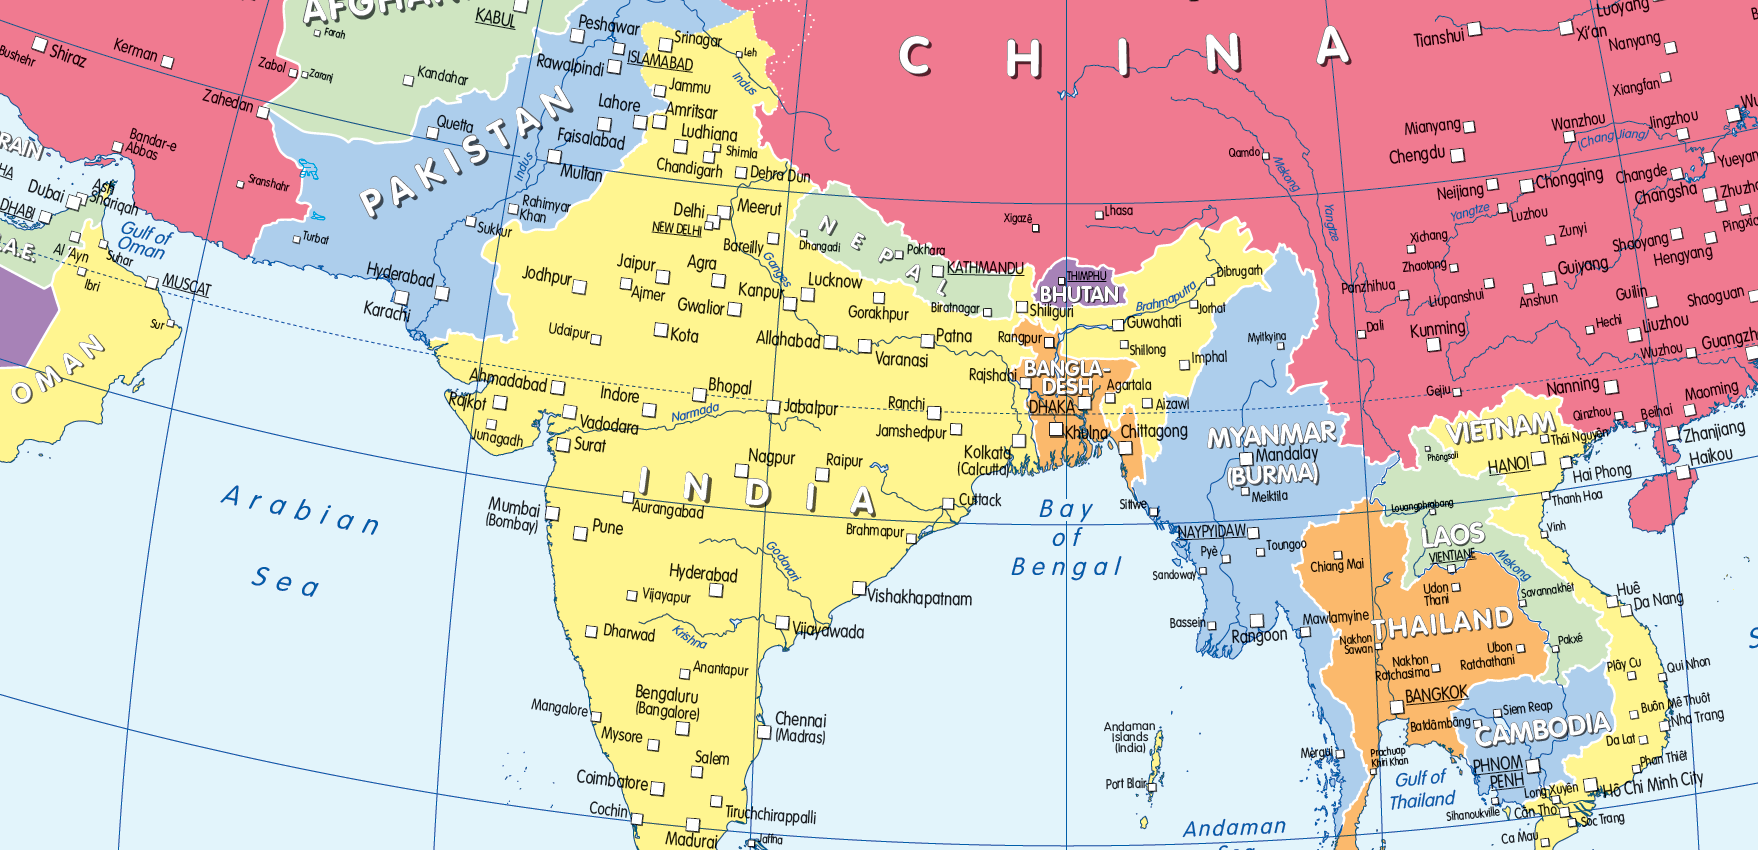 Political map of Asia - small wall map